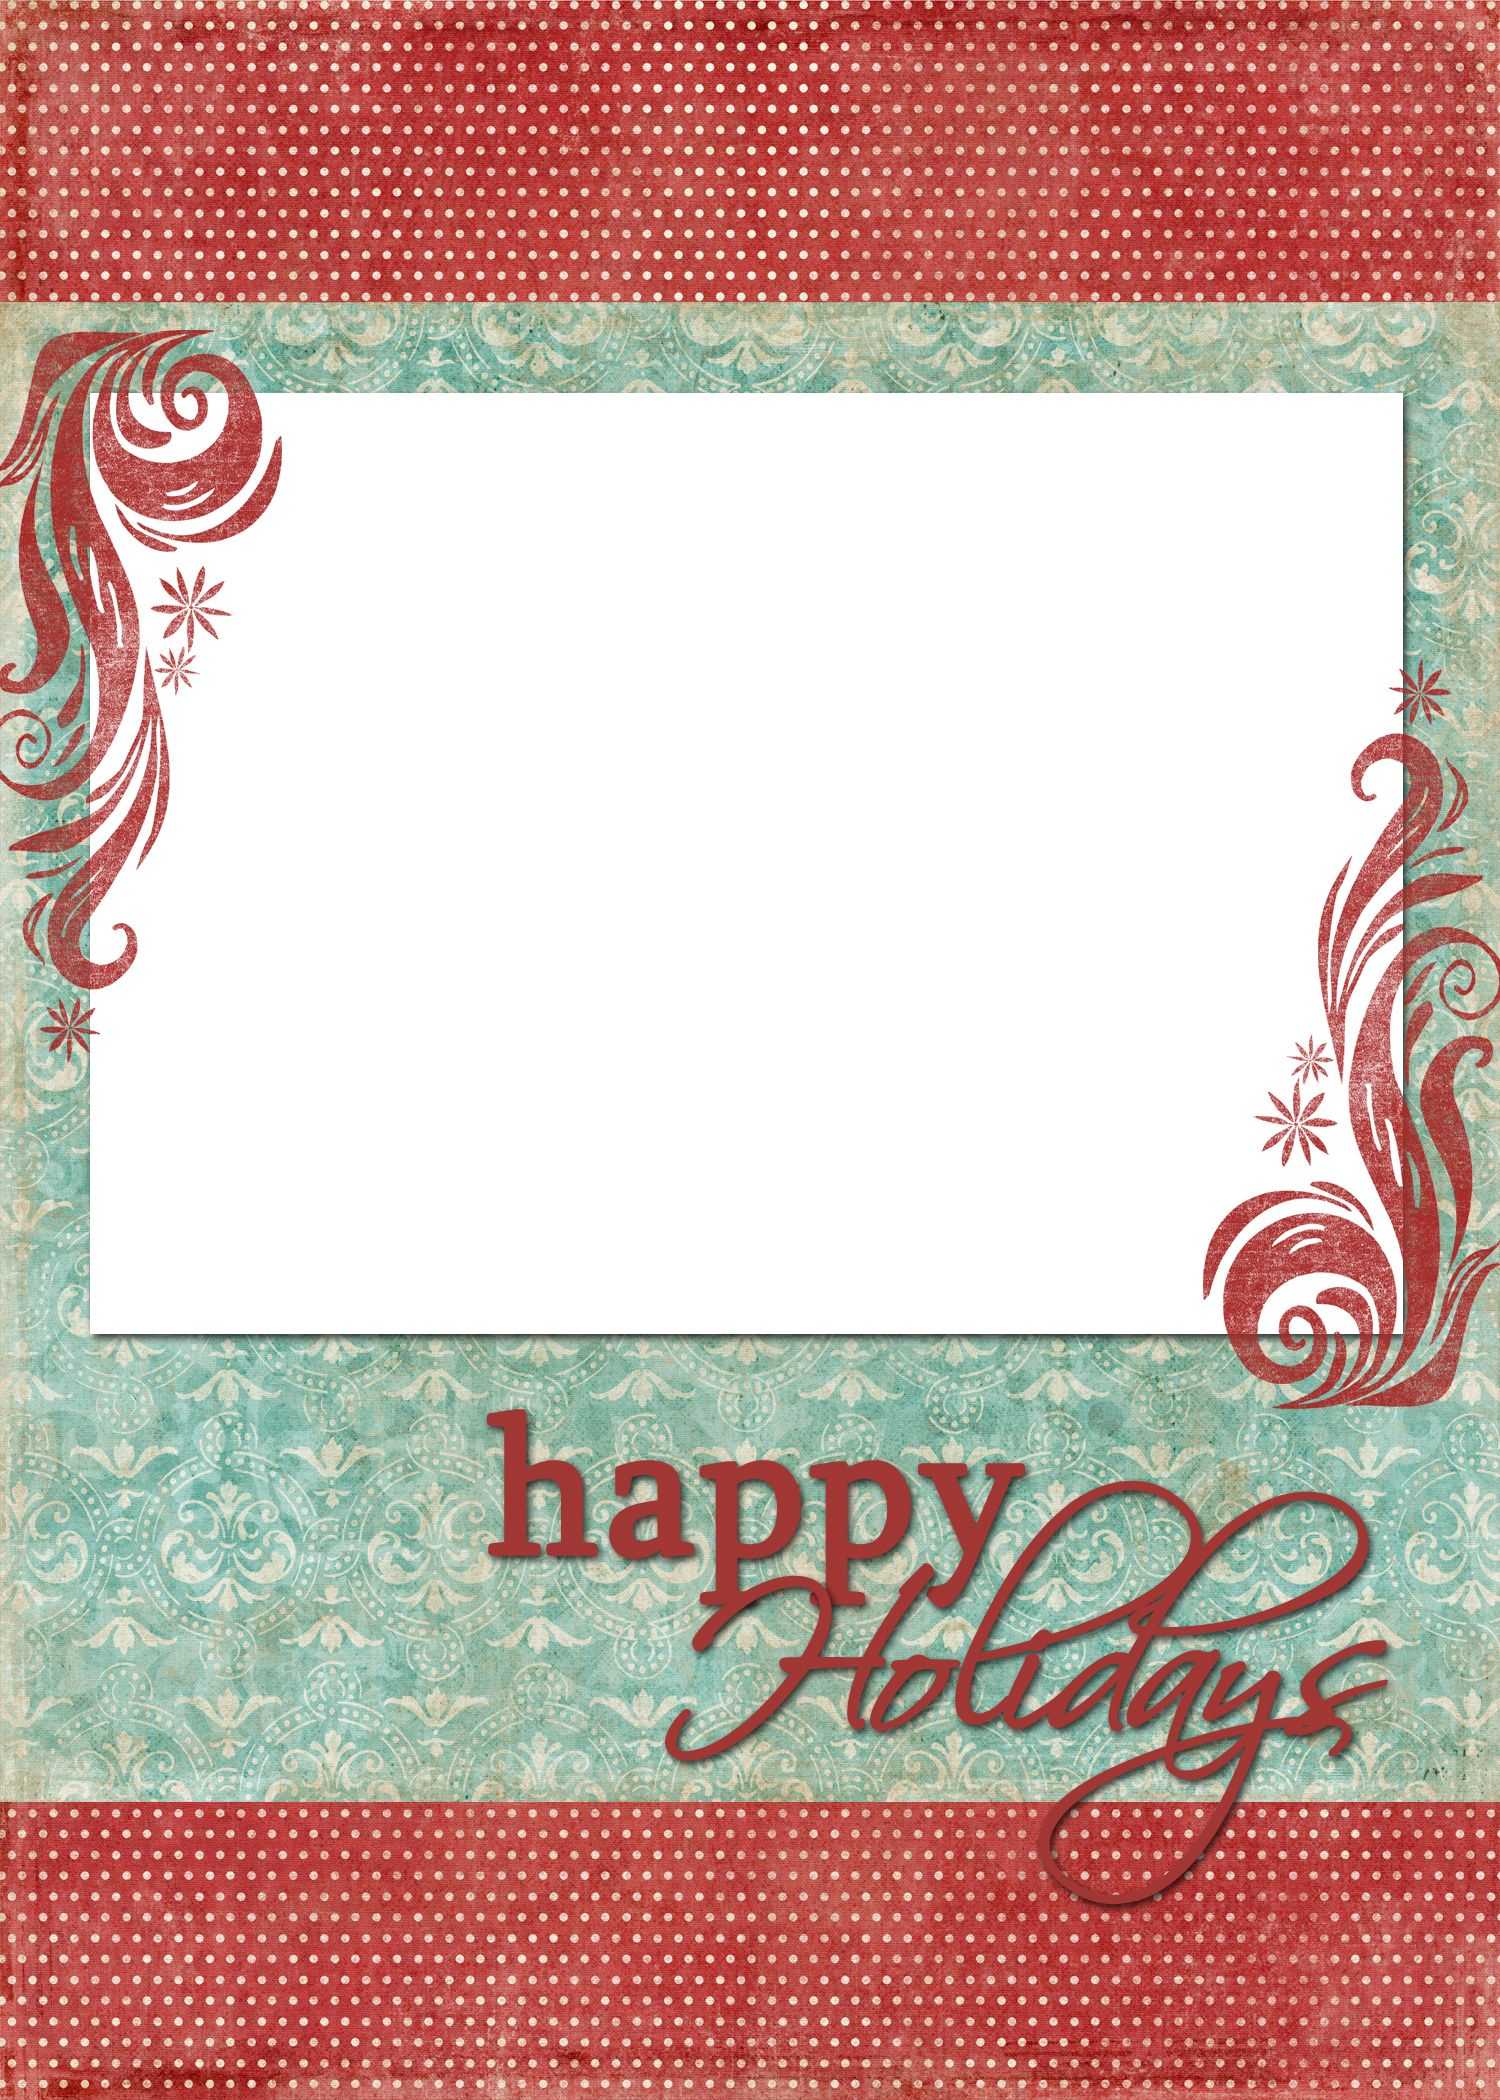 Happy Holidays Blue Red | Freebies :) | Christmas Card Within Happy Holidays Card Template